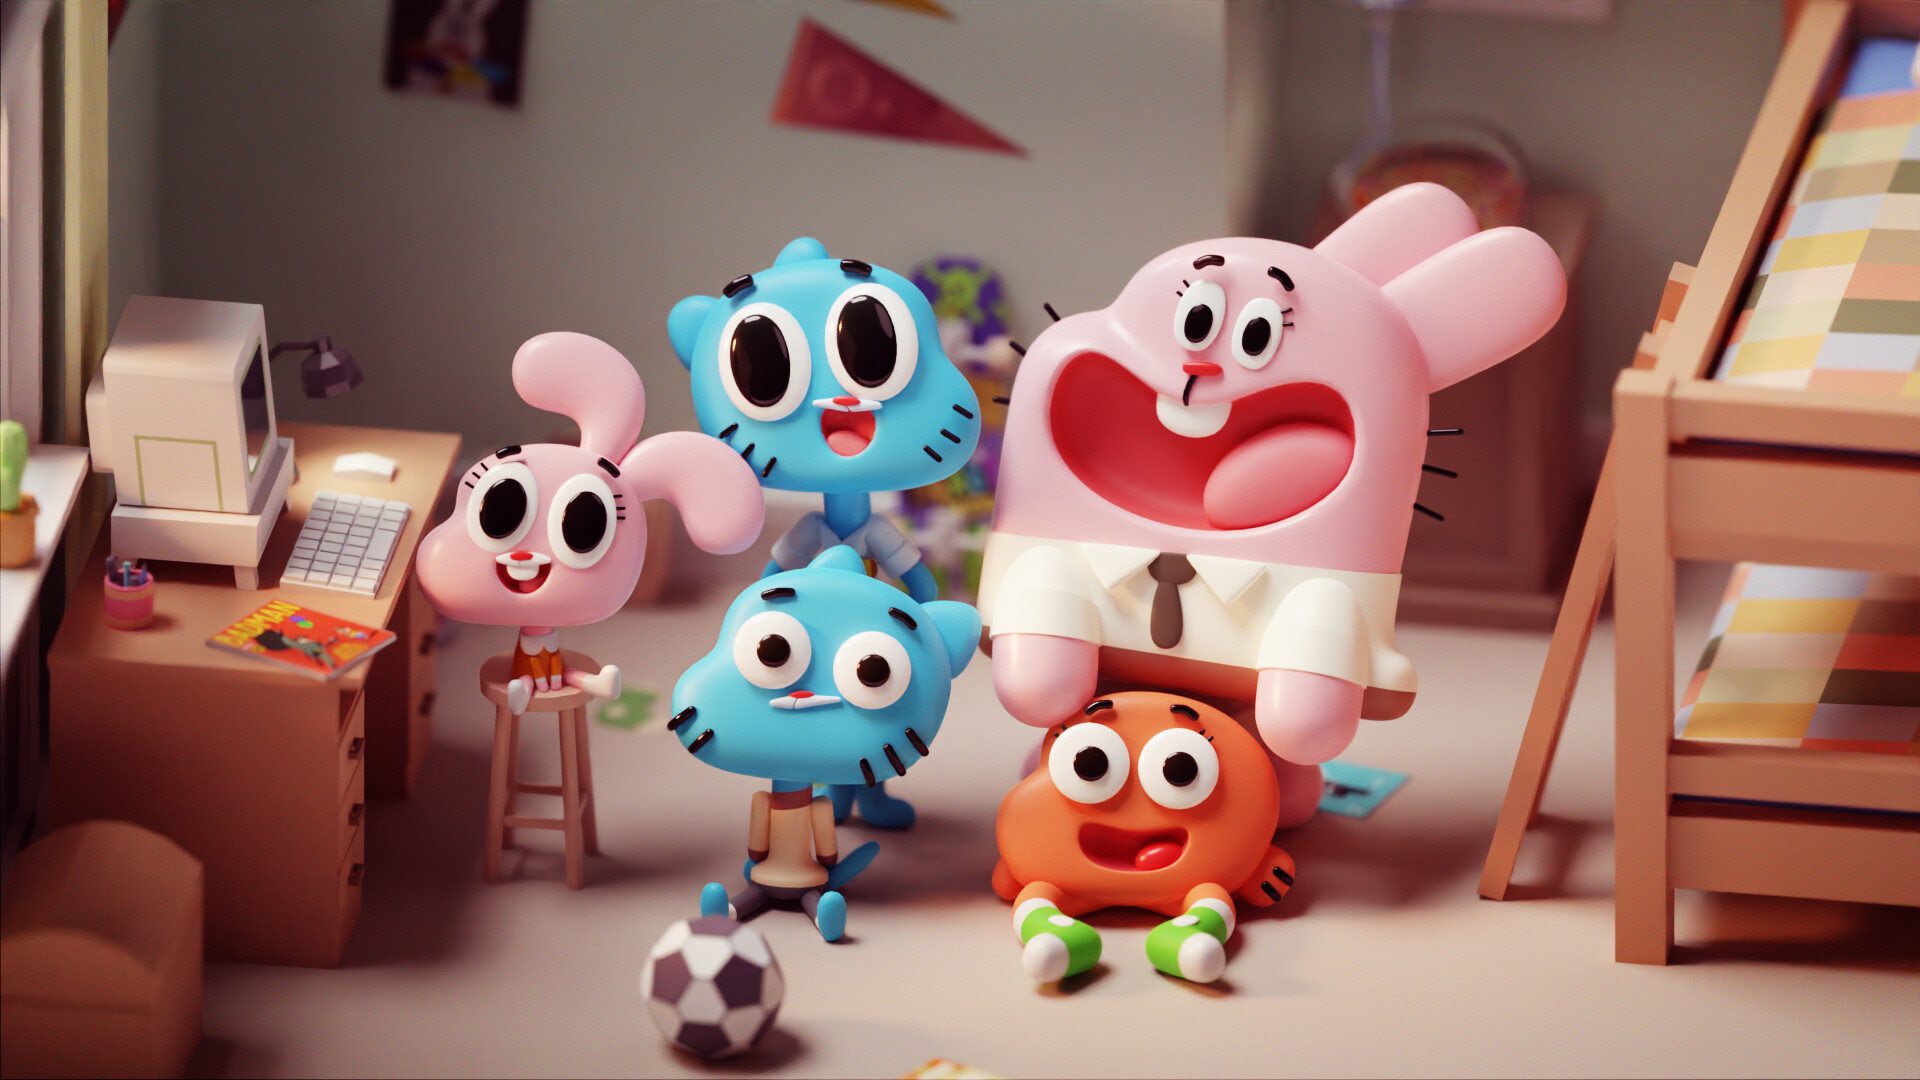 danielle domingue add the amazing world of gumball images photo